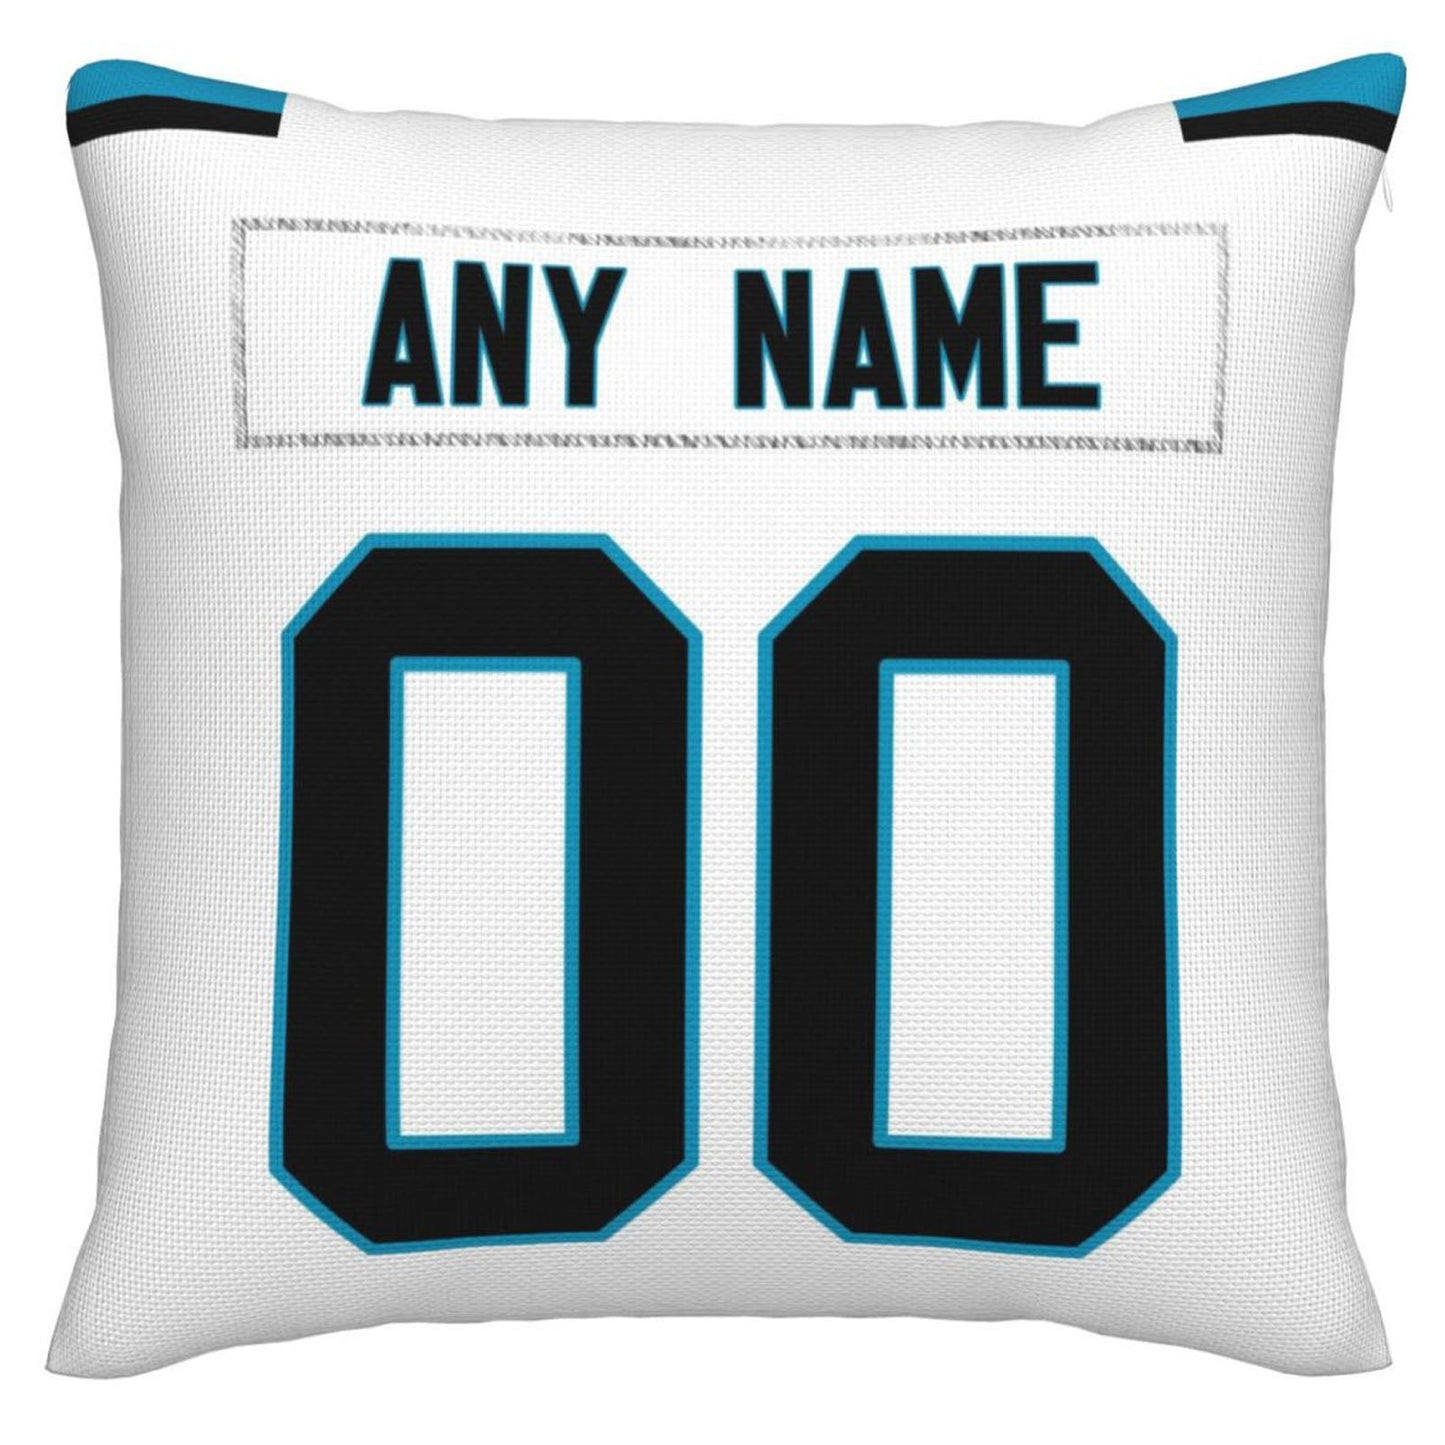 Custom C.Panthers Pillow Football Team Decorative Throw Pillow Case Print Personalized Football Style Fans Letters & Number Birthday Gift Football Pillows